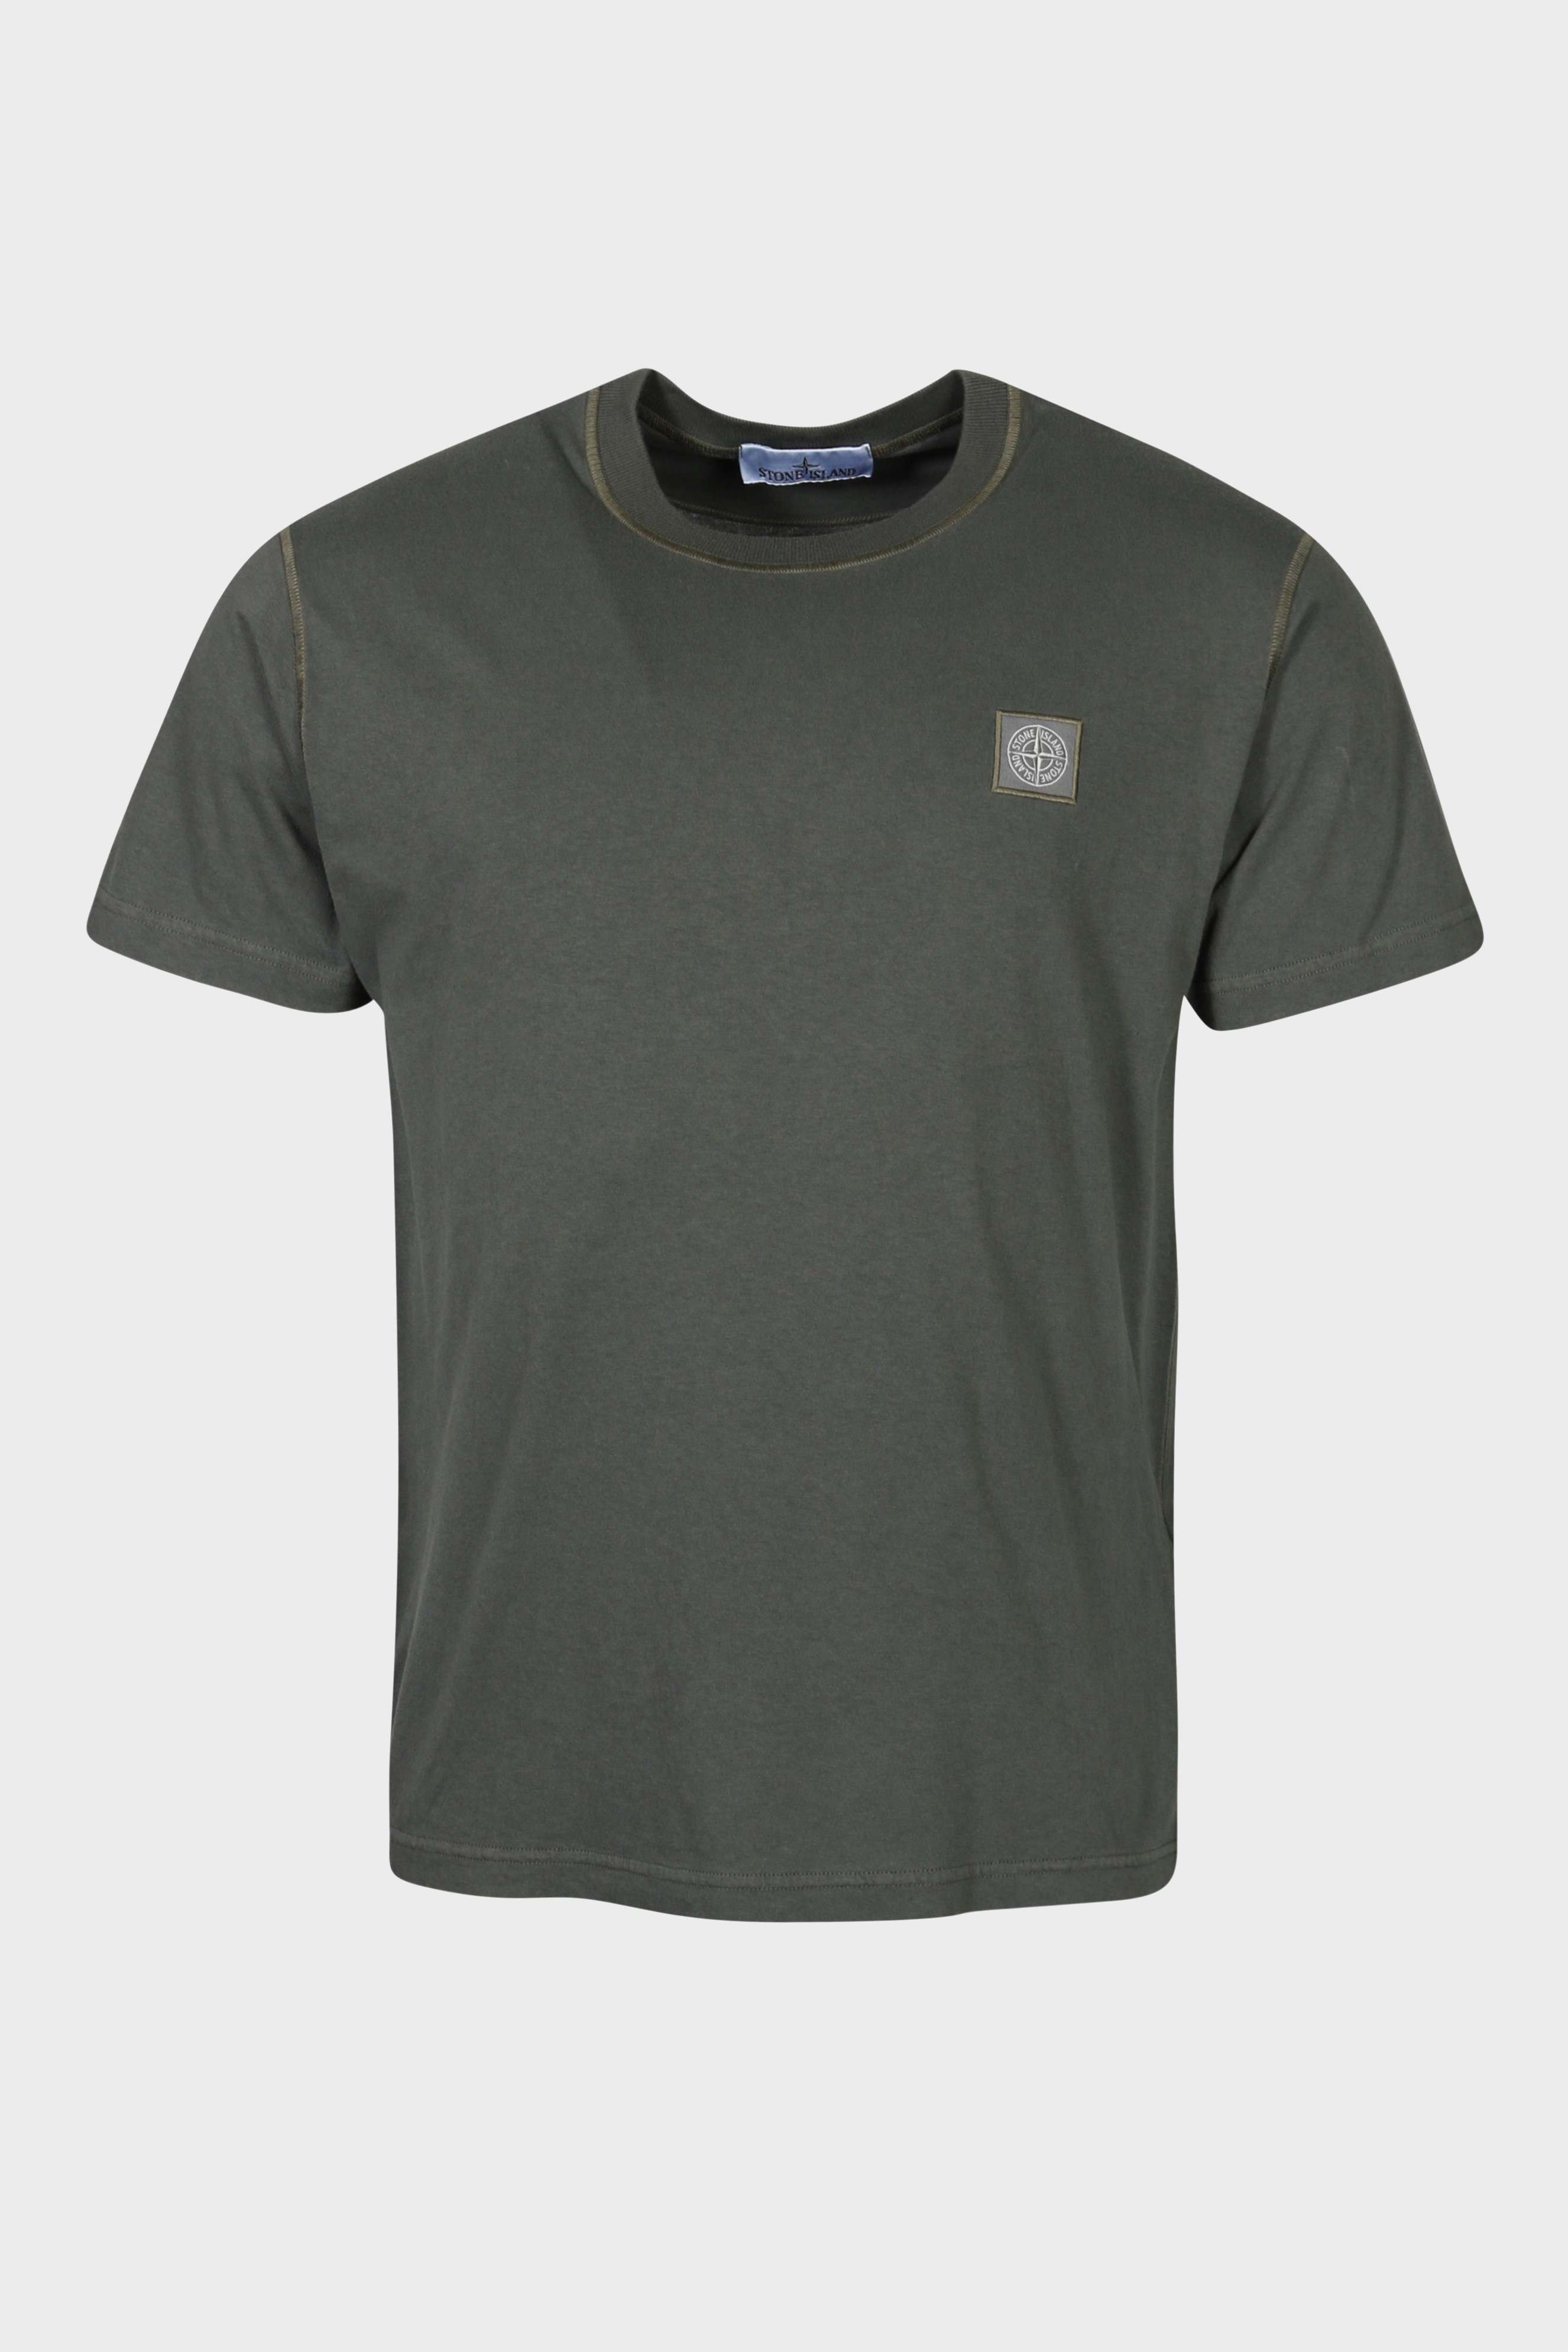 STONE ISLAND T-Shirt in Washed Green L